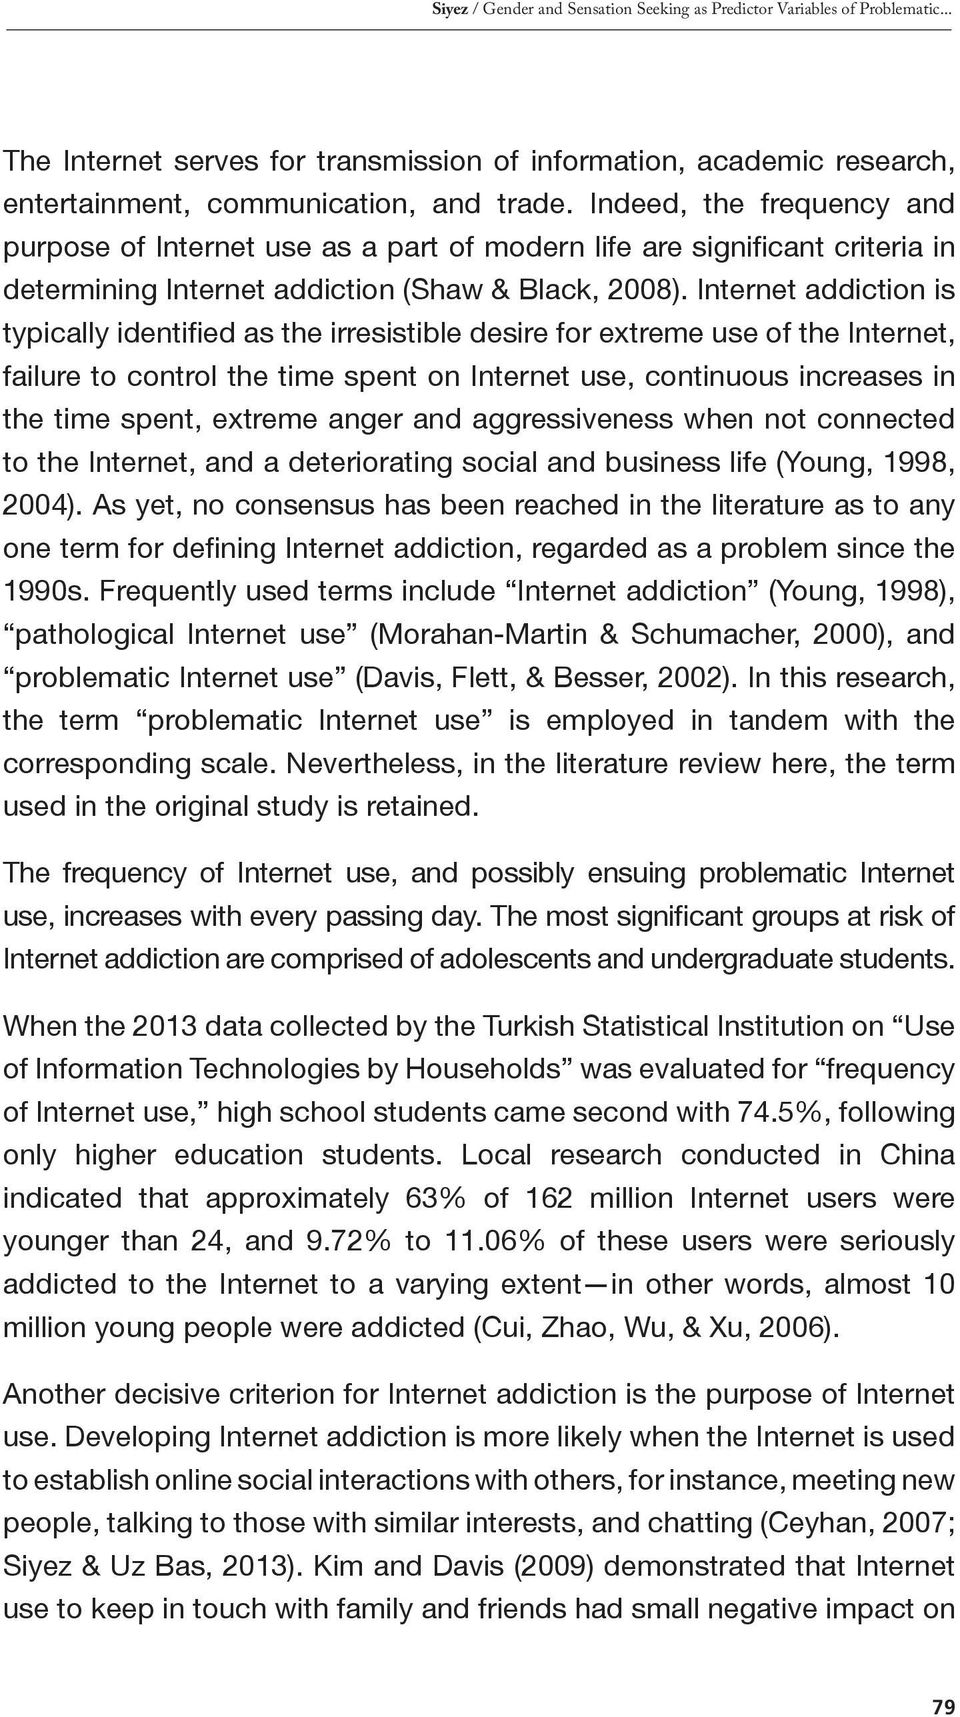 Internet addiction is typically identified as the irresistible desire for extreme use of the Internet, failure to control the time spent on Internet use, continuous increases in the time spent,